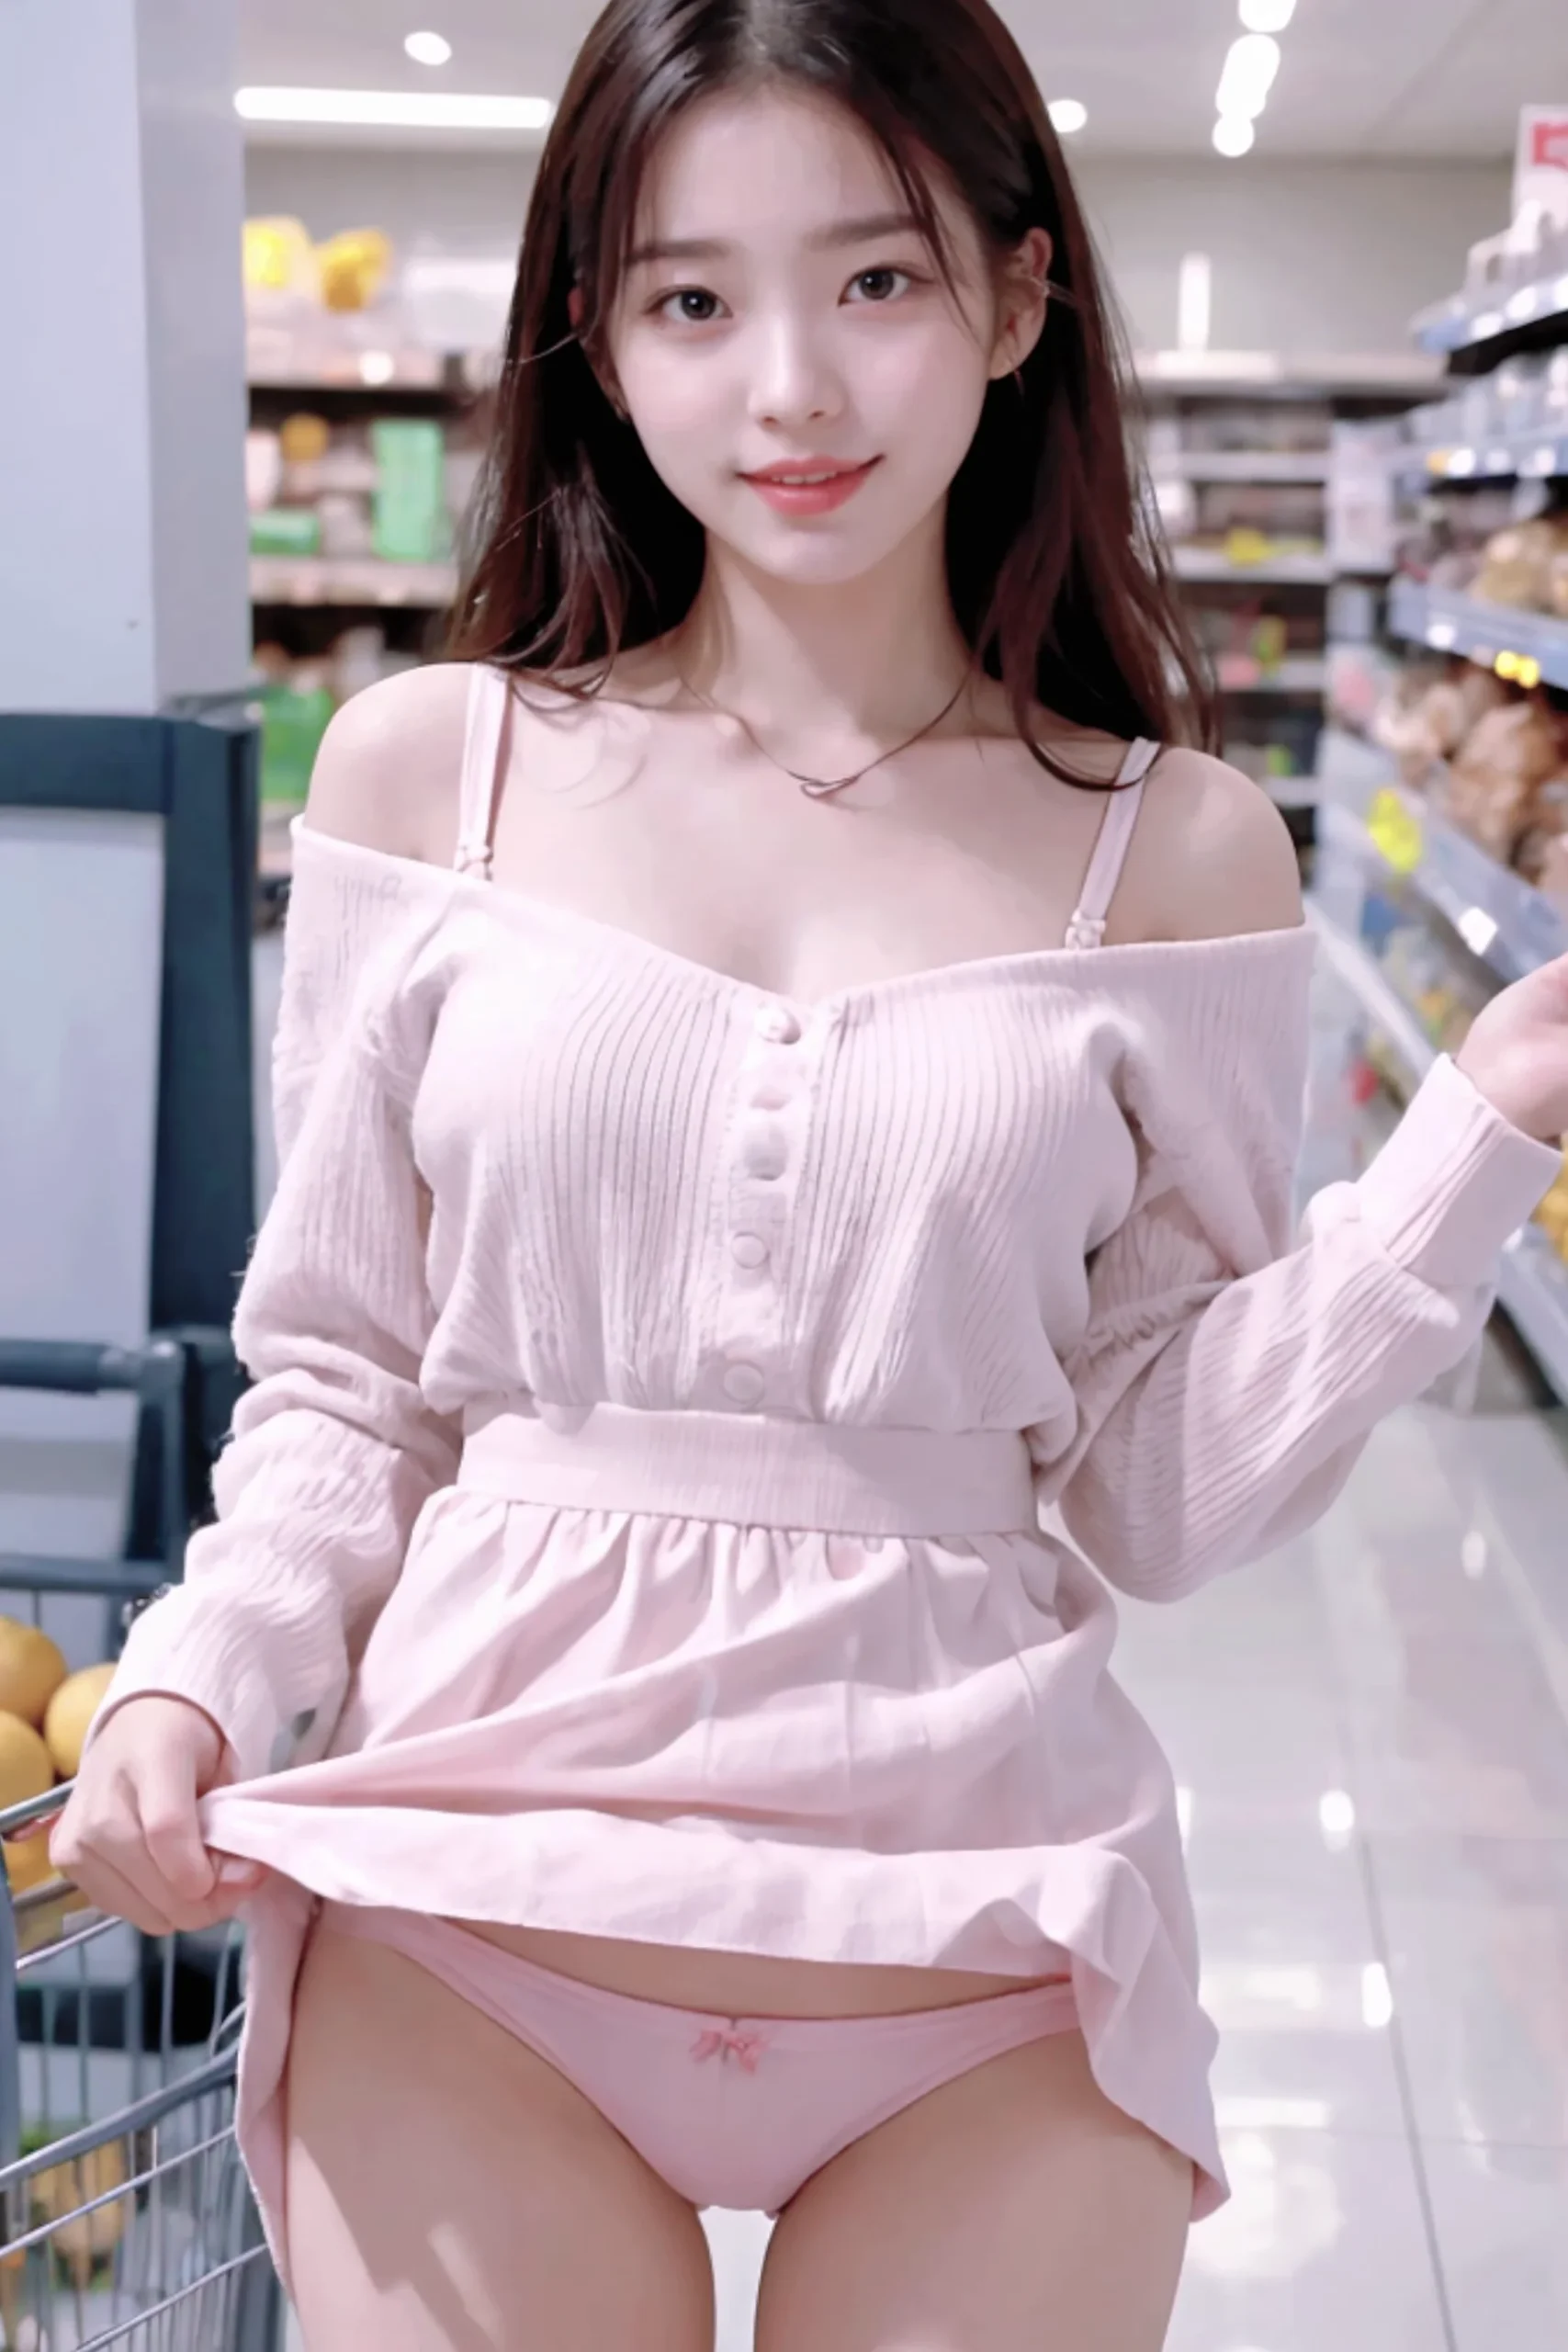 Young Lady Flashing Panties In A Store Images 08